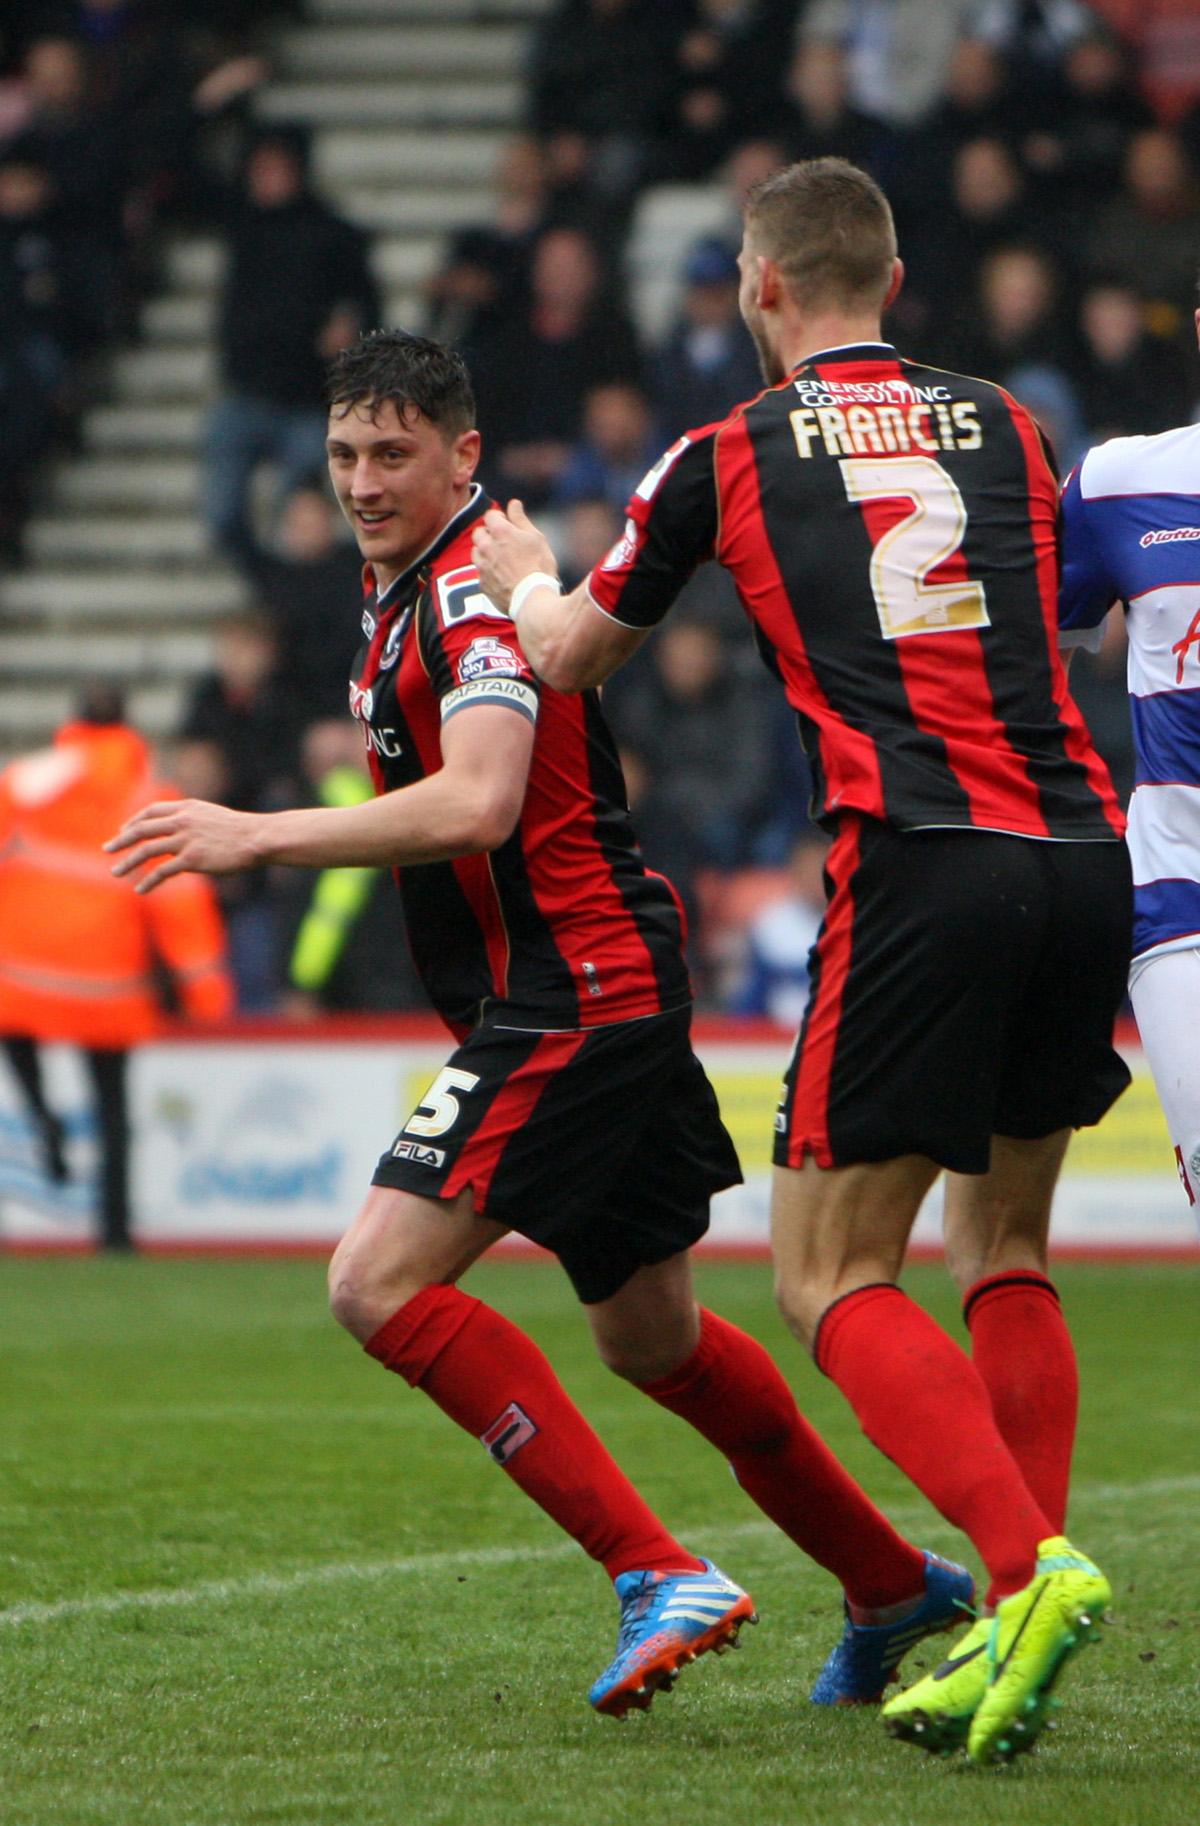 Check out all the action from AFC Bournemouth v Queens Park Rangers on Saturday April 5, 2014 at Goldsands Stadium